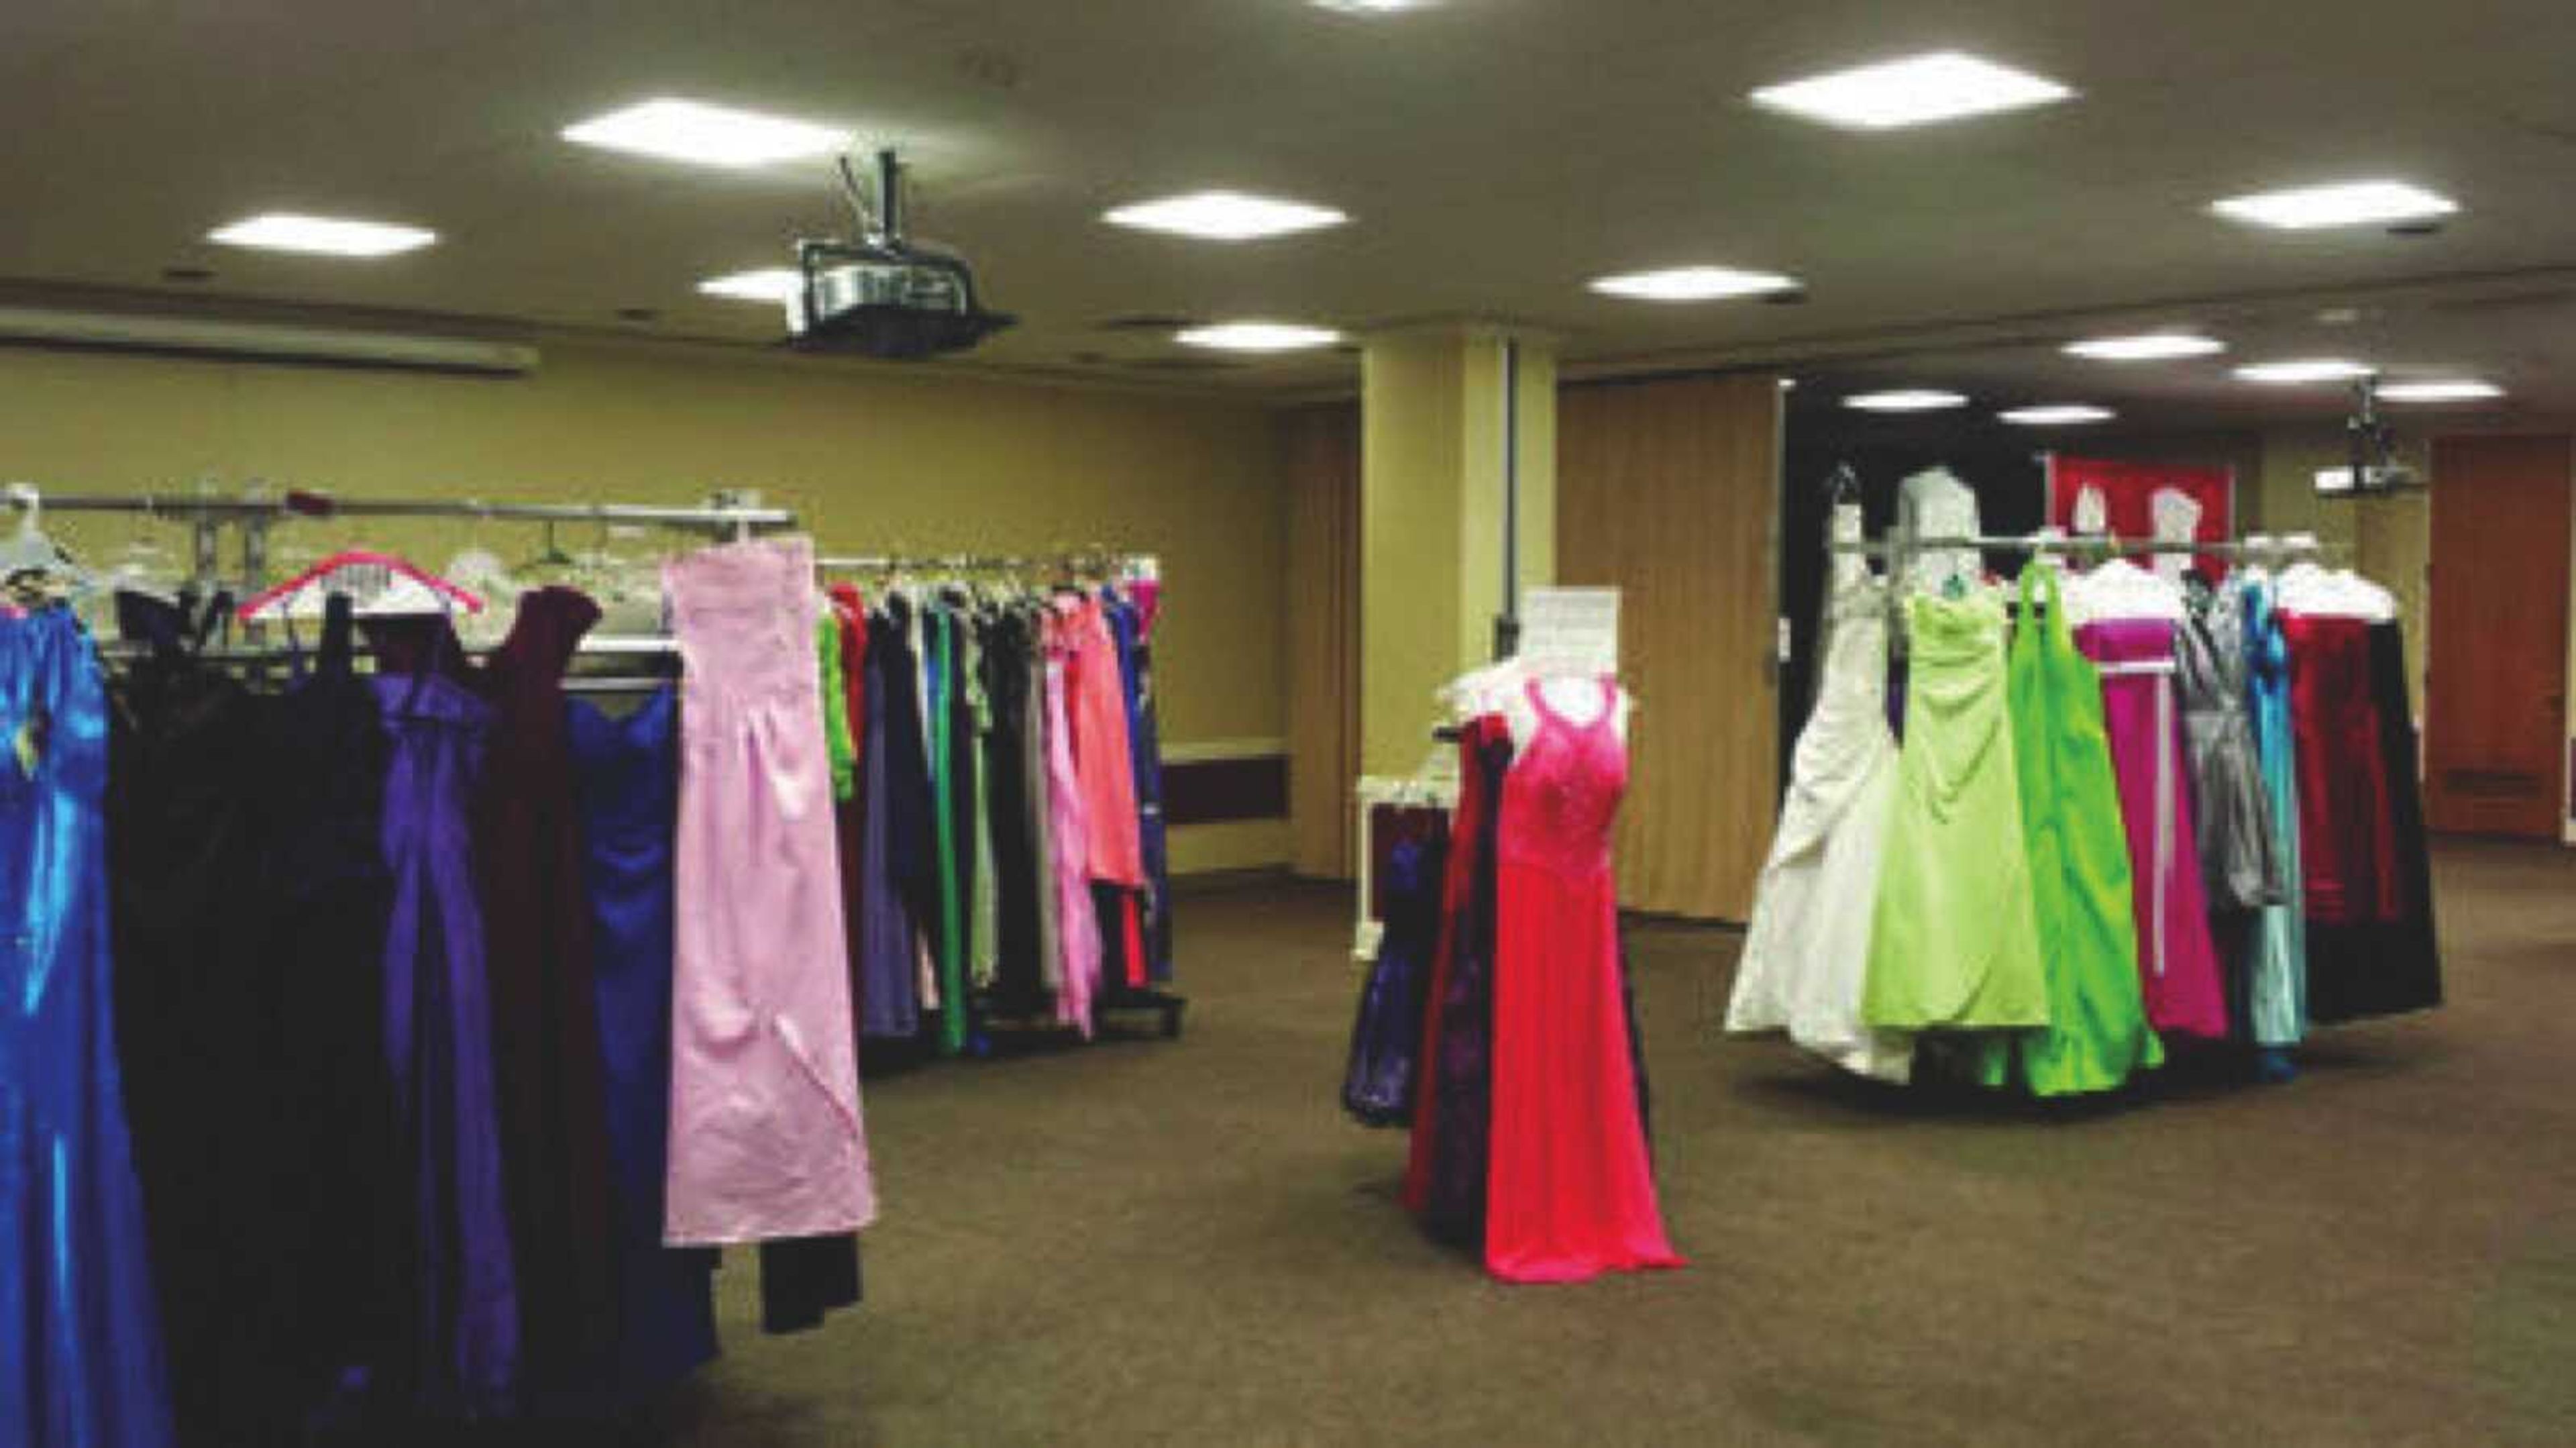 The Fancy That! Dress Sale will be held from 10 a.m. to 4 p.m. Jan. 30 in the University Center third floor lobby.